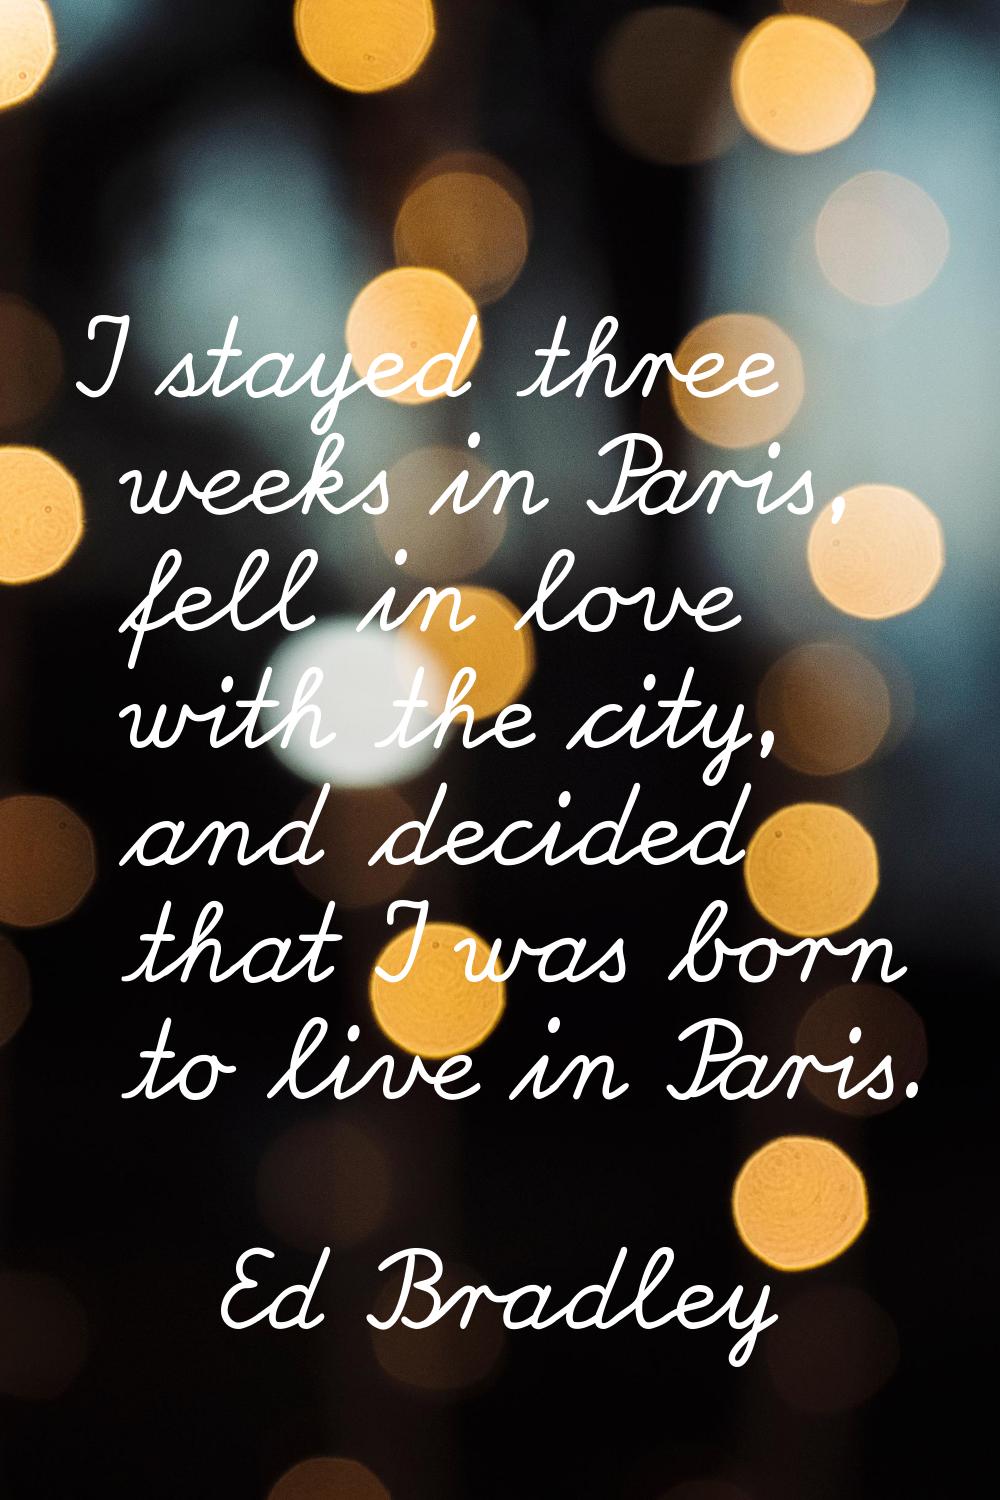 I stayed three weeks in Paris, fell in love with the city, and decided that I was born to live in P